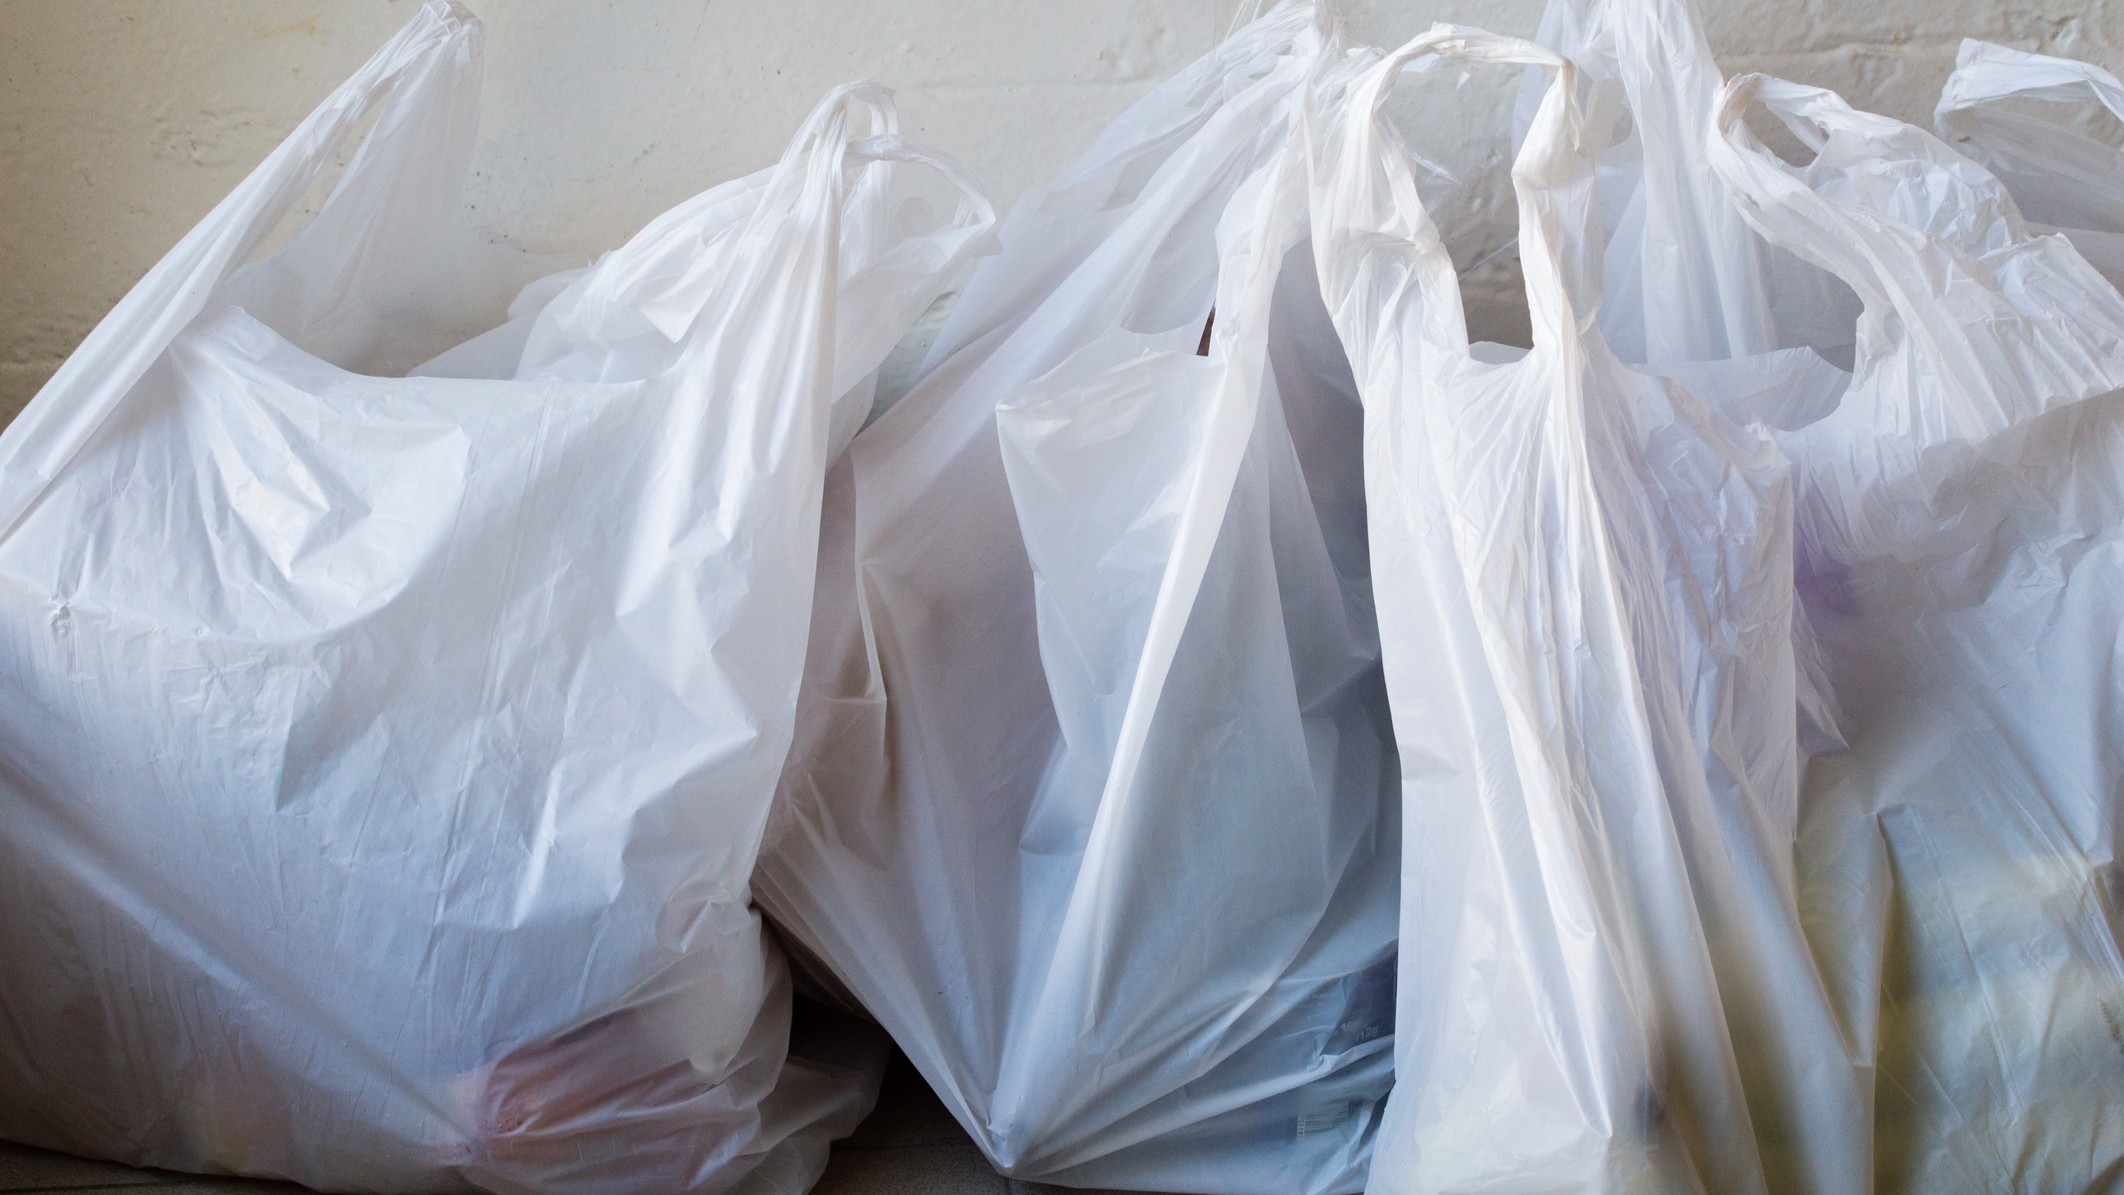 NJ Bag Ban: Now There Are Too Many Reusable Bags – NBC New York